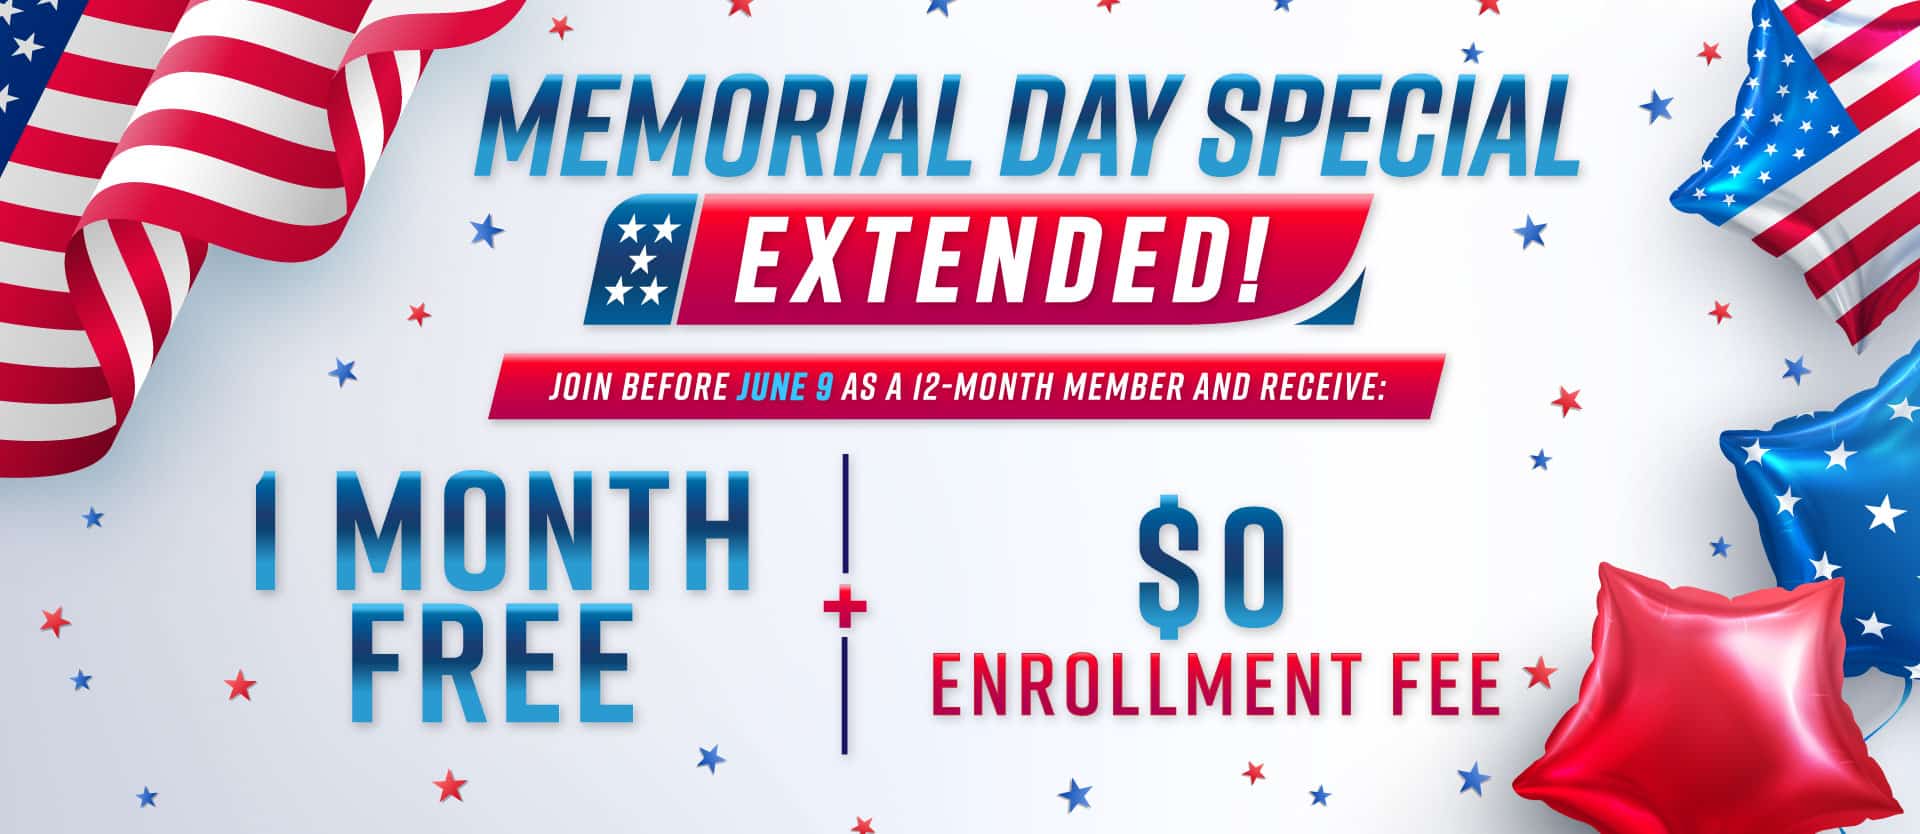 1 Month Free and $0 Enrollment Fee extended